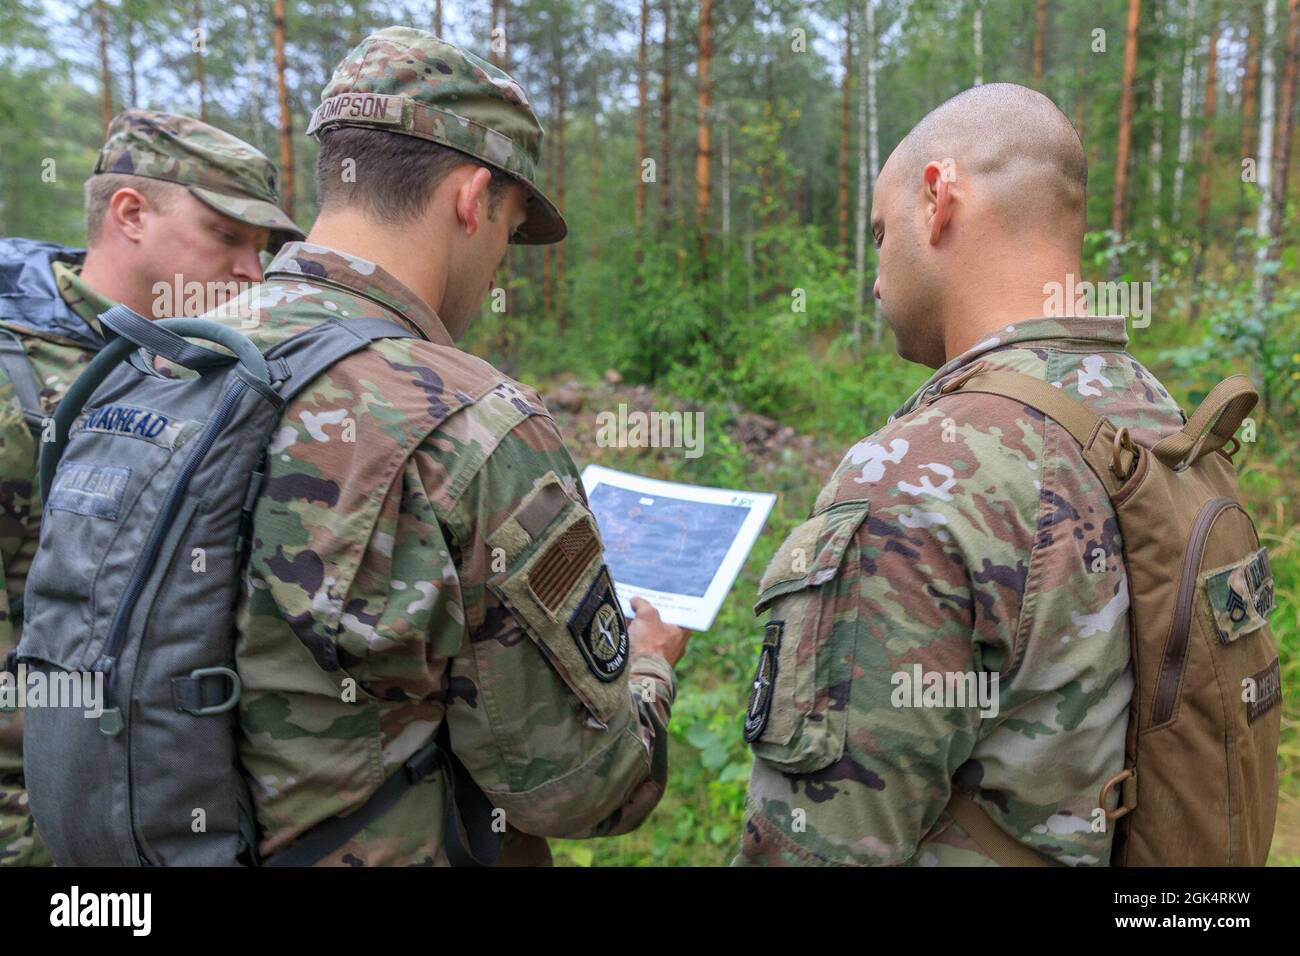 A team representing the United States of America, consults their map on the orienteering course during the Interallied Confederation of Reserve Officers military competition in Lahti, Finland on August 1st. Teams were given several different maps and tasked with find control points in the woods. The CIOR MILCOMP is an annual competition among NATO and Partnership for Peace nations. This competition test reserve service members from allied nations on several core disciplines in teams of three. Stock Photo